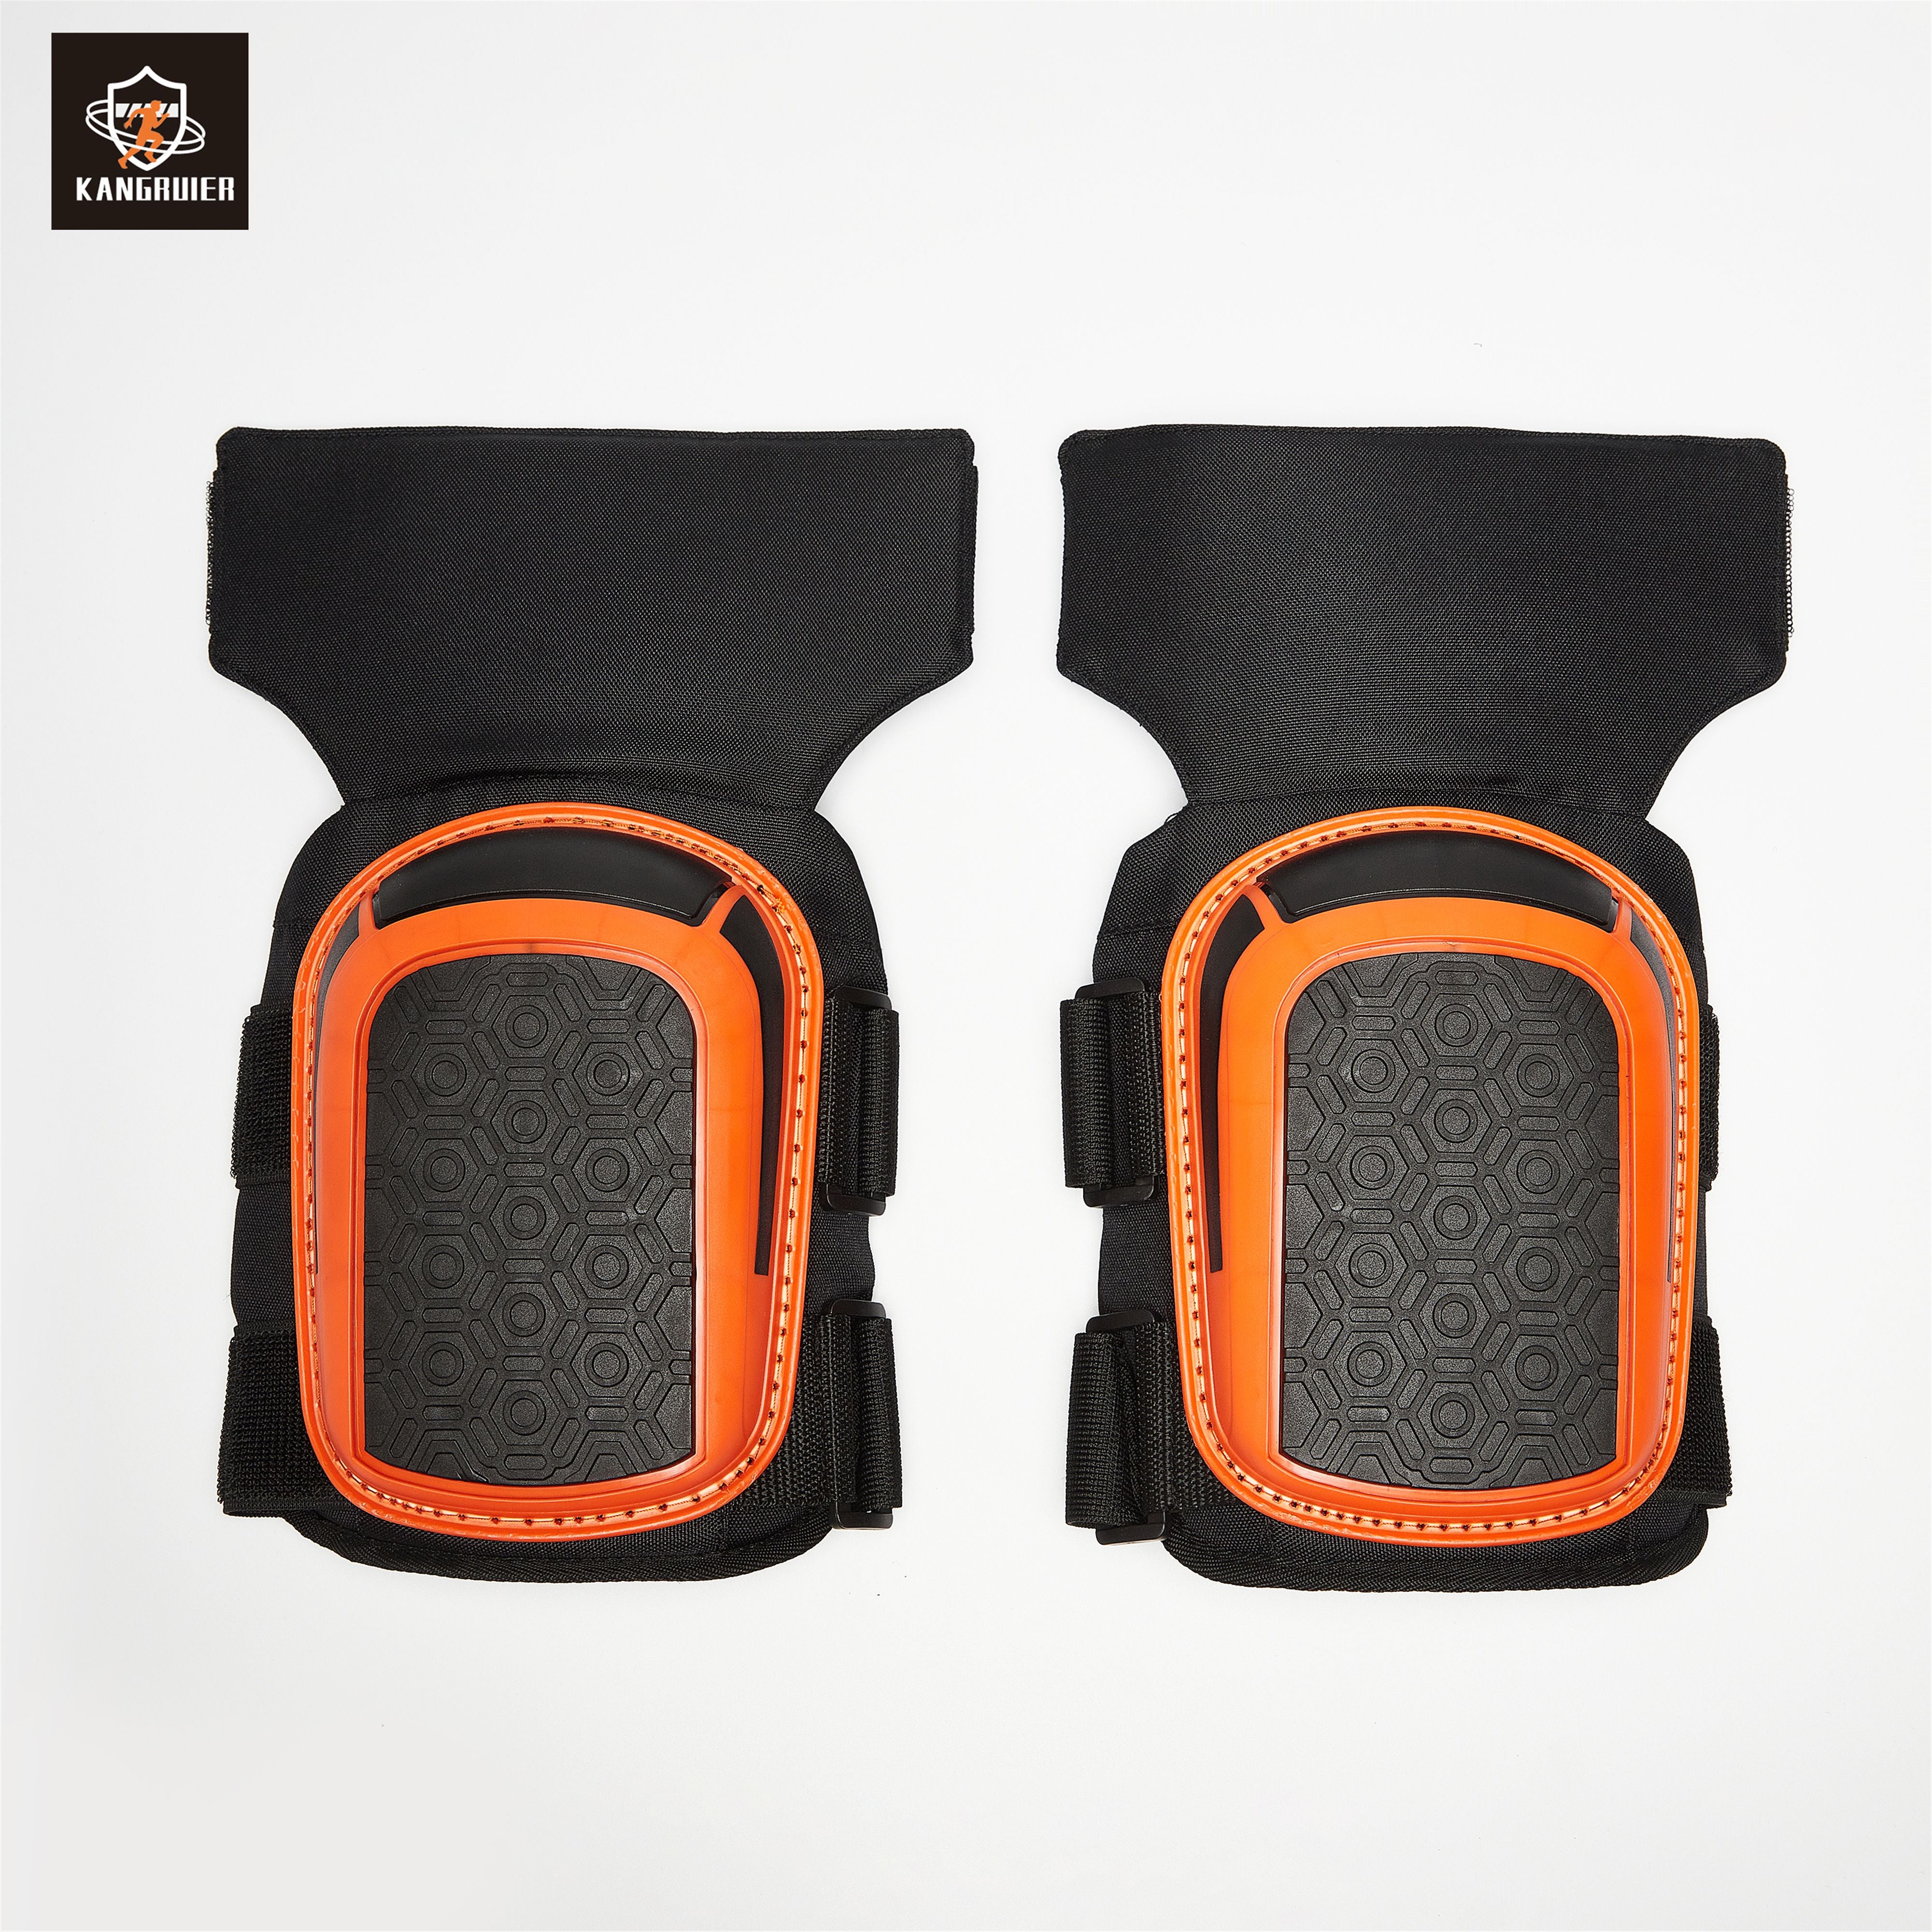 Knee Pads for Work, Gardening, Cleaning,Construction, Flooring, Thick Foam Cushion